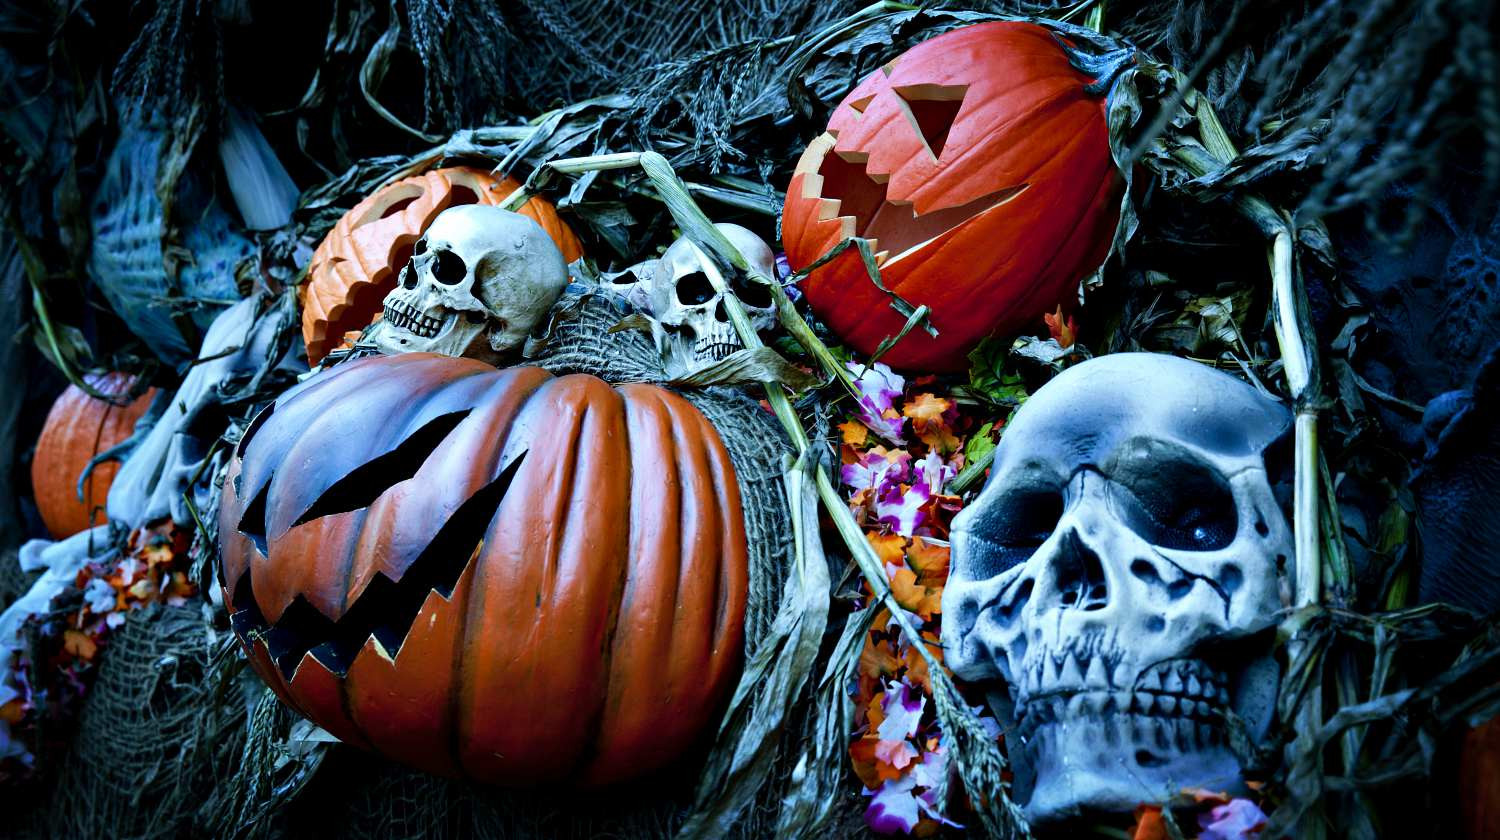 Diy Scary Indoor Halloween Decorations
 Halloween Decorations And Projects